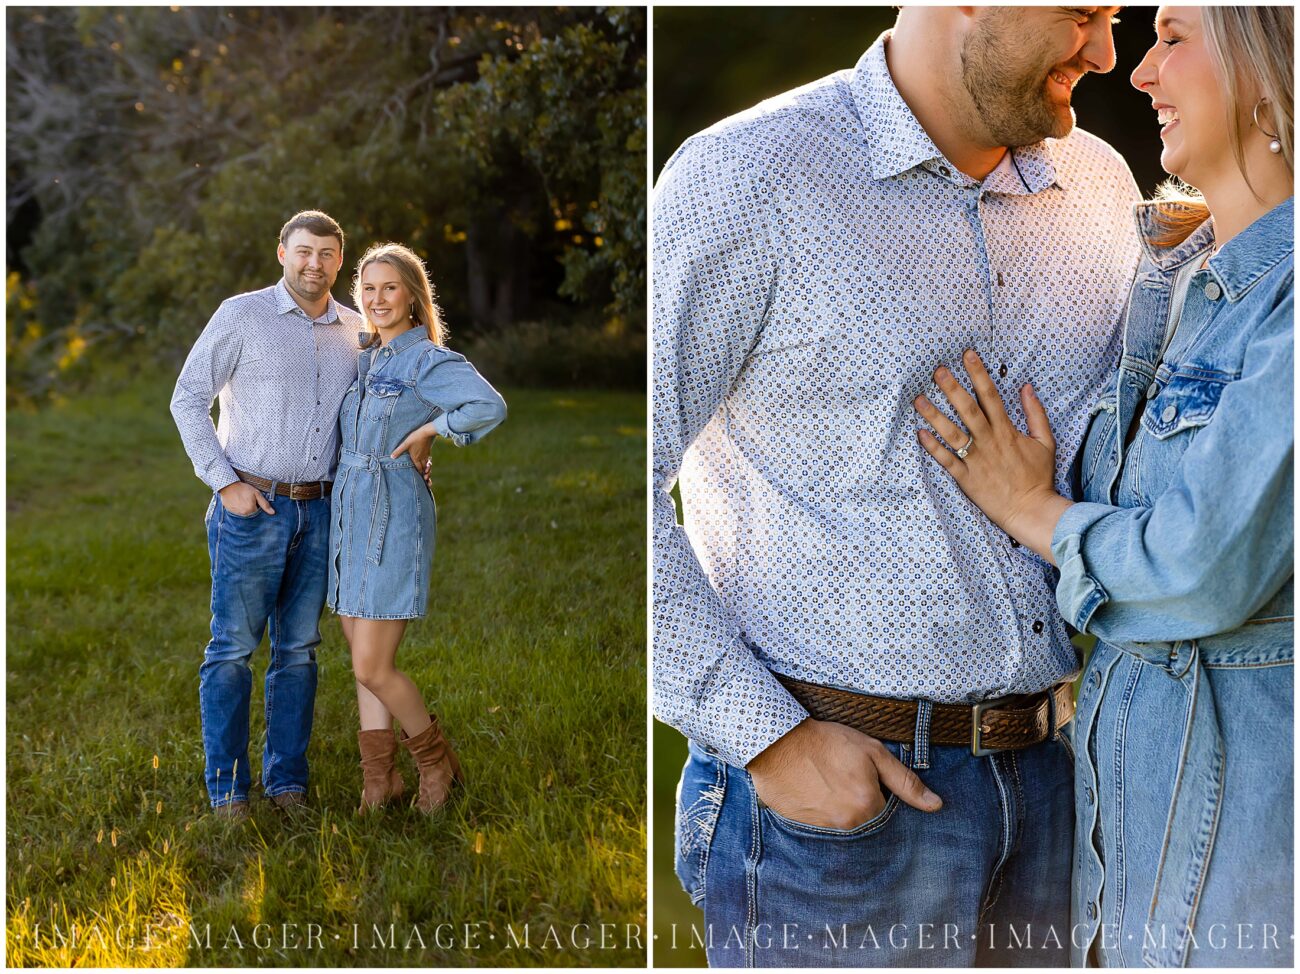 Wade and Colie's Autumn Engagement Session by the Apple Trees